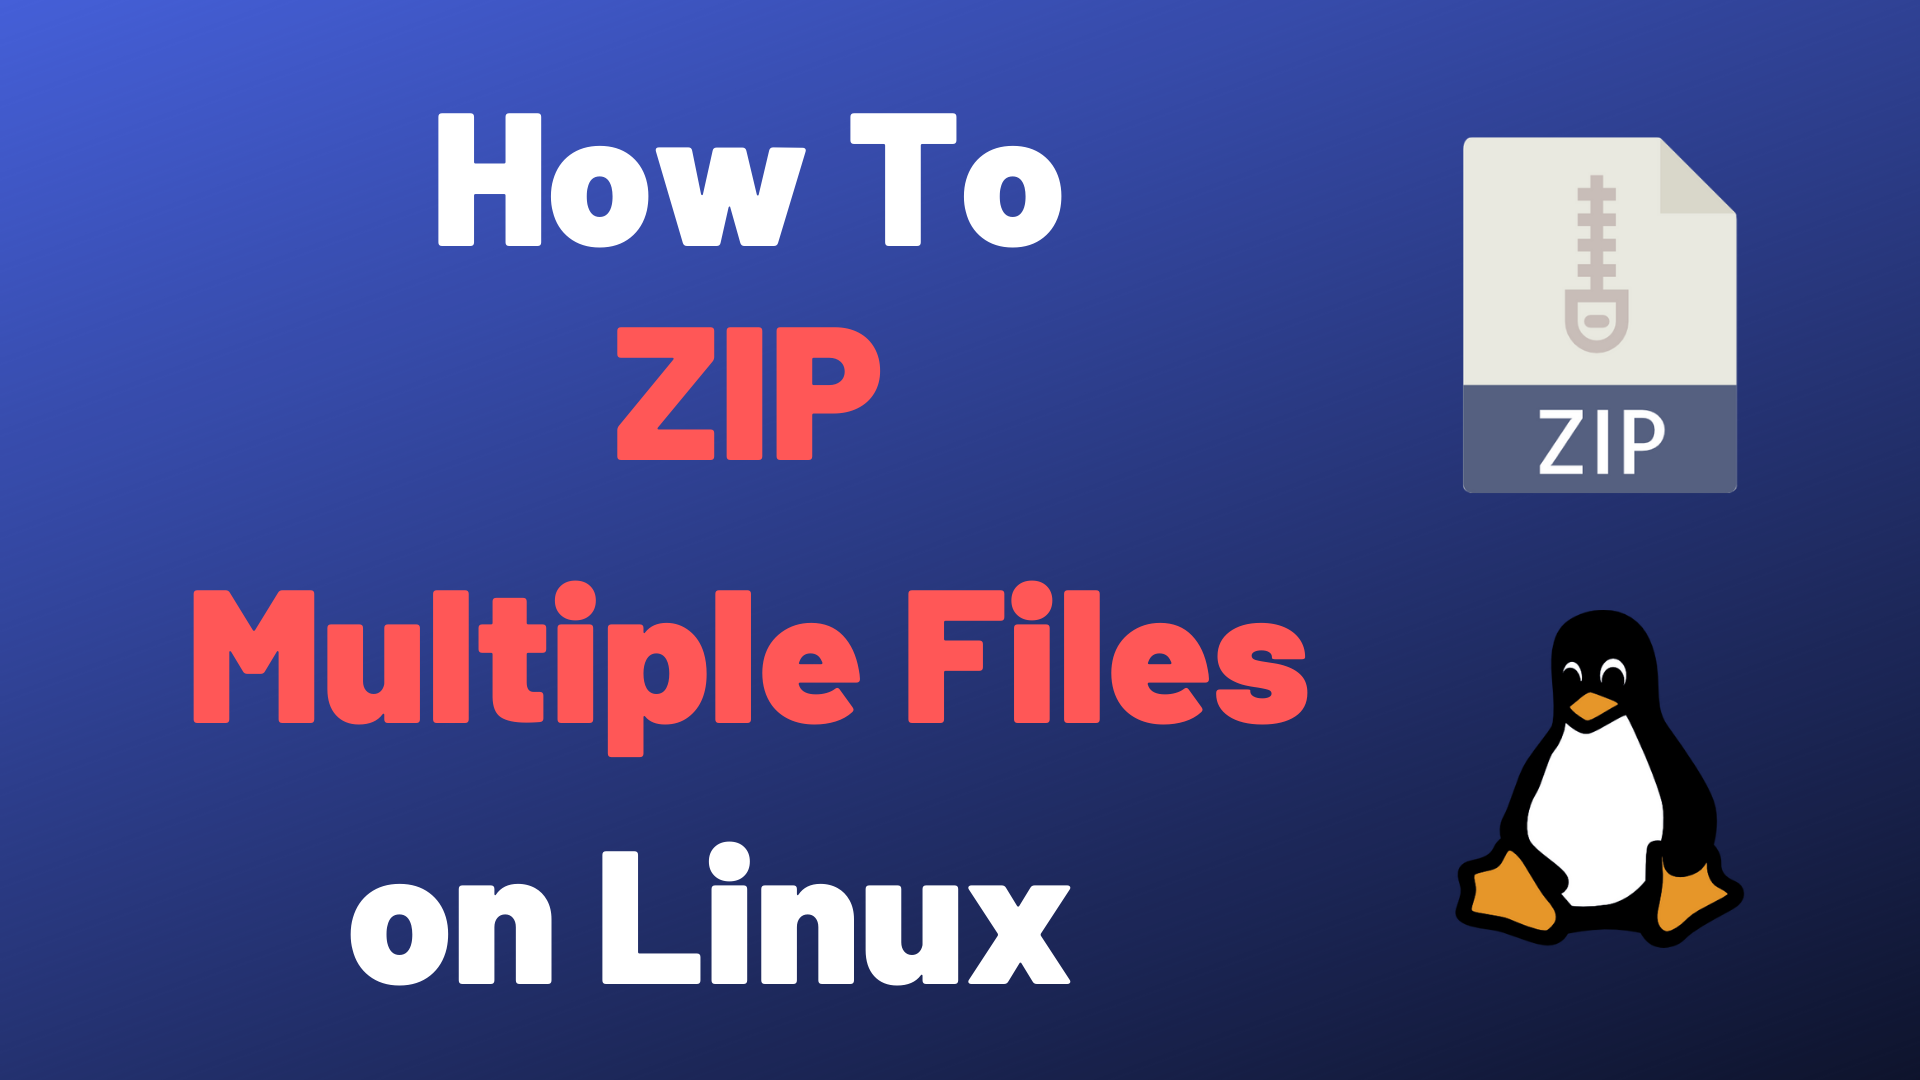 How To Zip Multiple Files on Linux